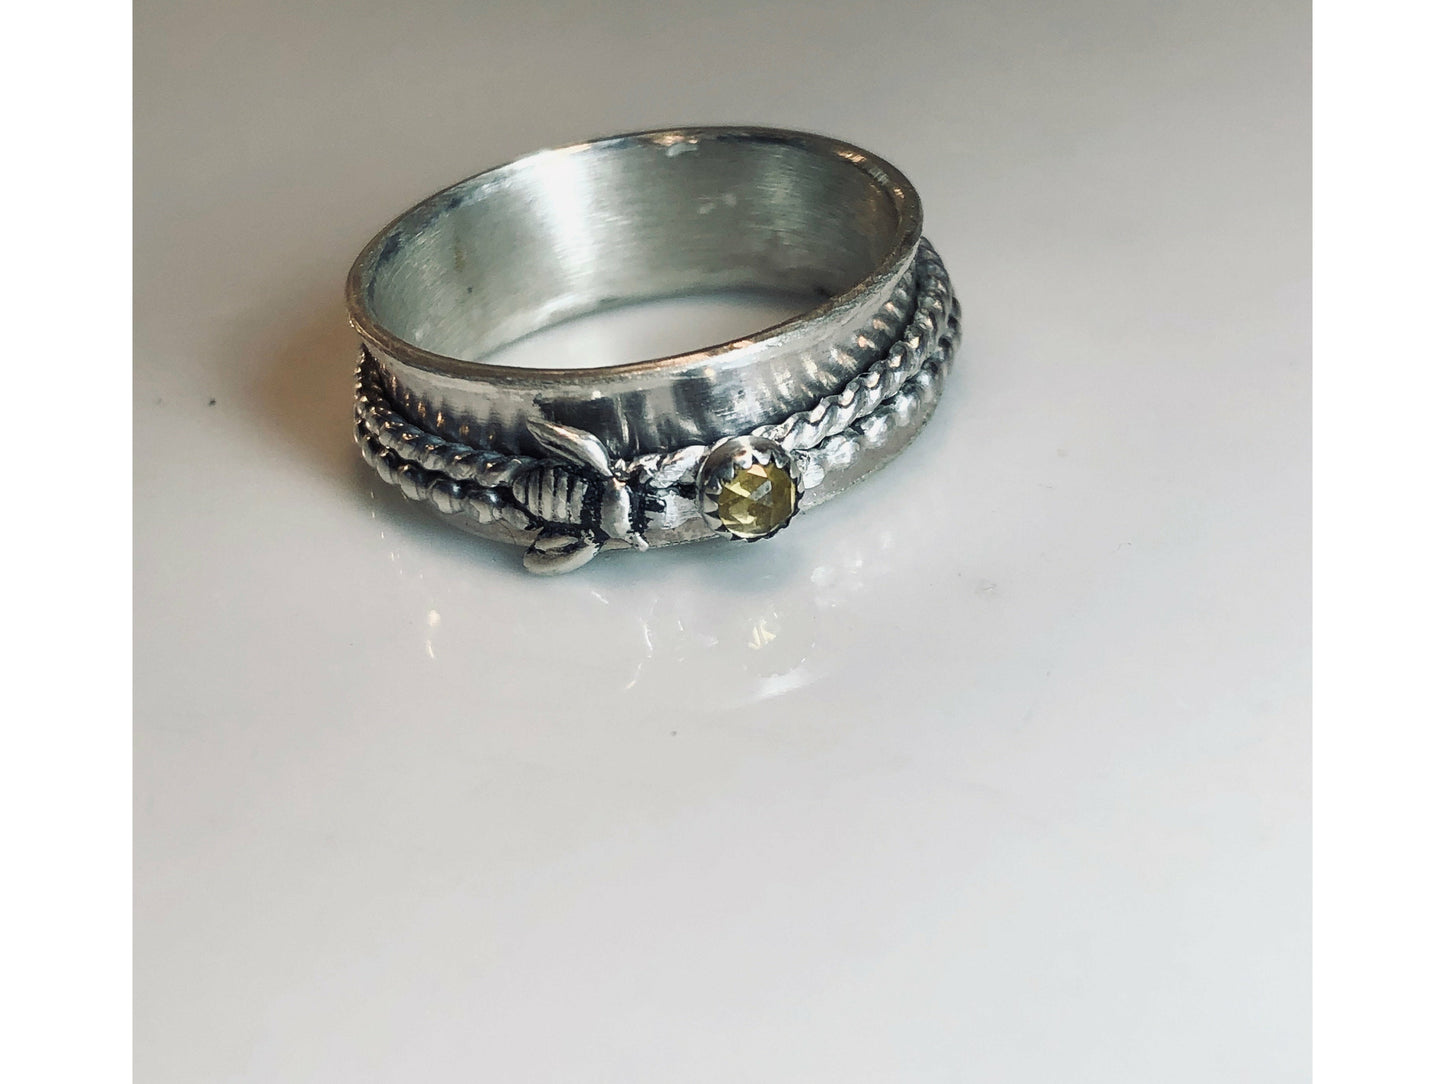 bee-ring-spinner-ring-sterling-silver-ring-meditation-ring-bee-jewelry-fidget-ring-anxiety-jewelry-sterling-silver-ring-boho-ring